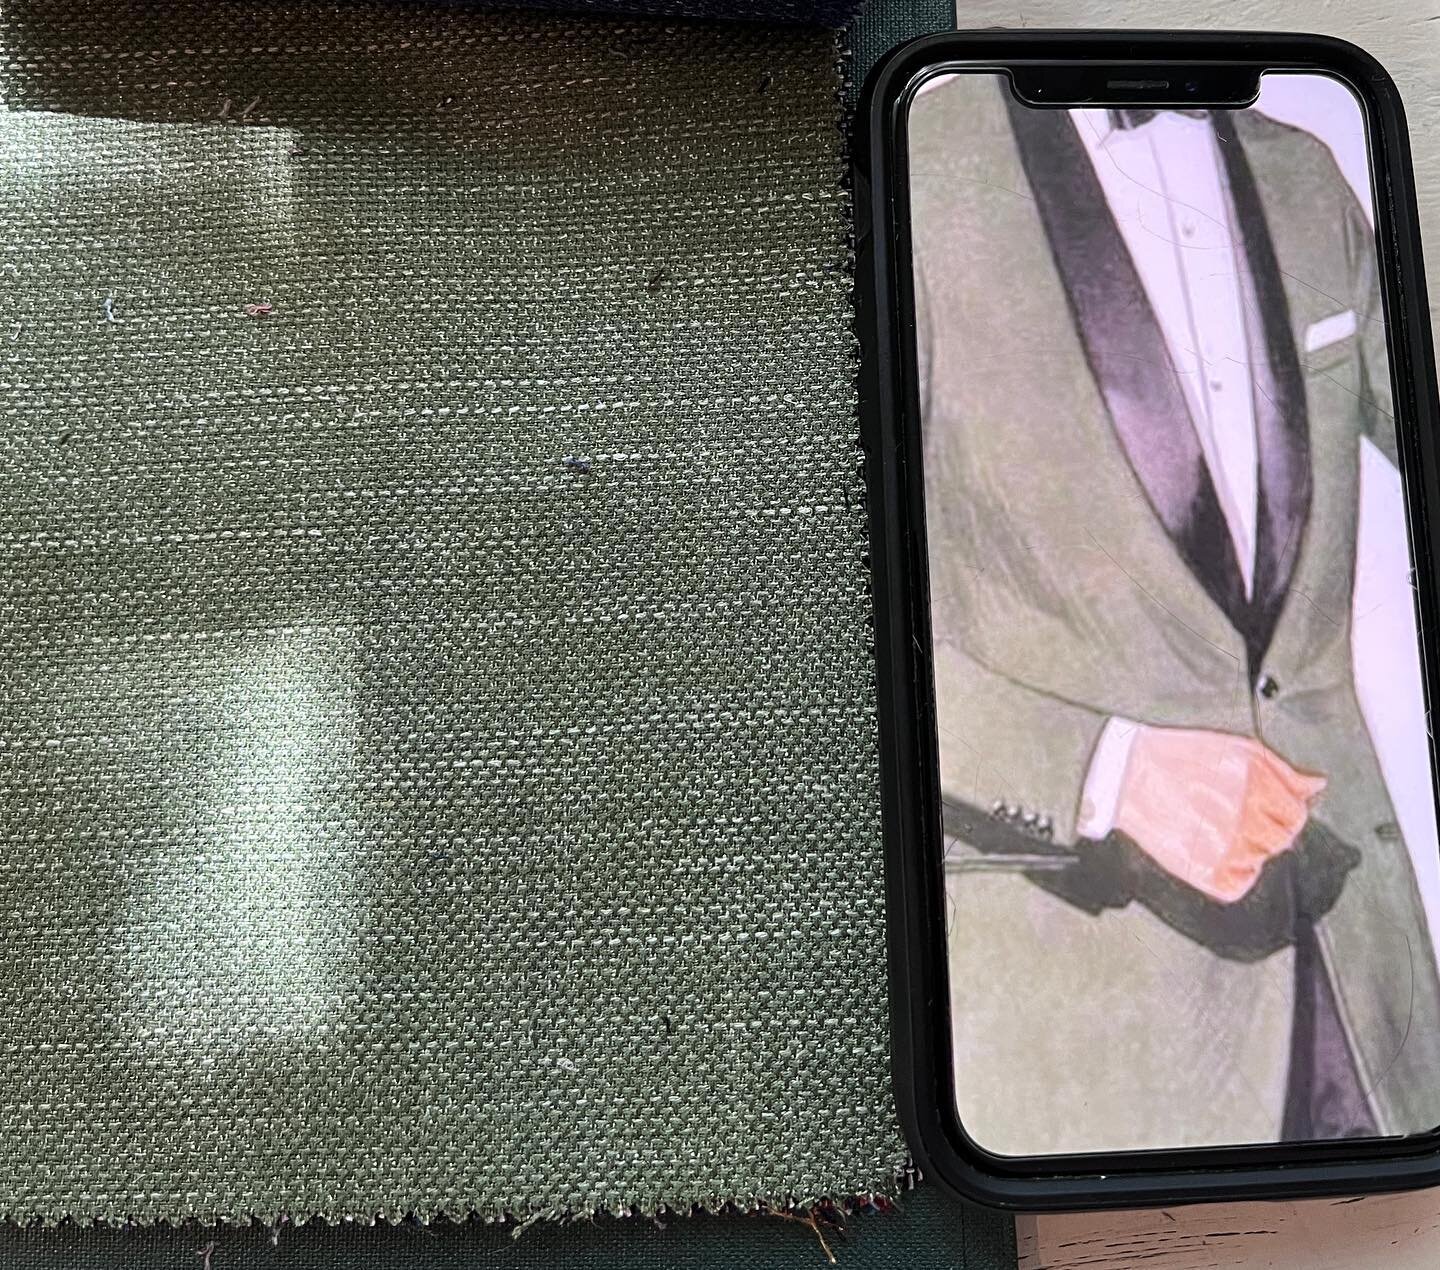 @dormeuil1842 Dorsilk being used for a sick green dinner jacket. I love when clients have a vision I&rsquo;m able to bring to life.

#menswear #custom #customclothing #gq #atlantacustom #hoodcustom